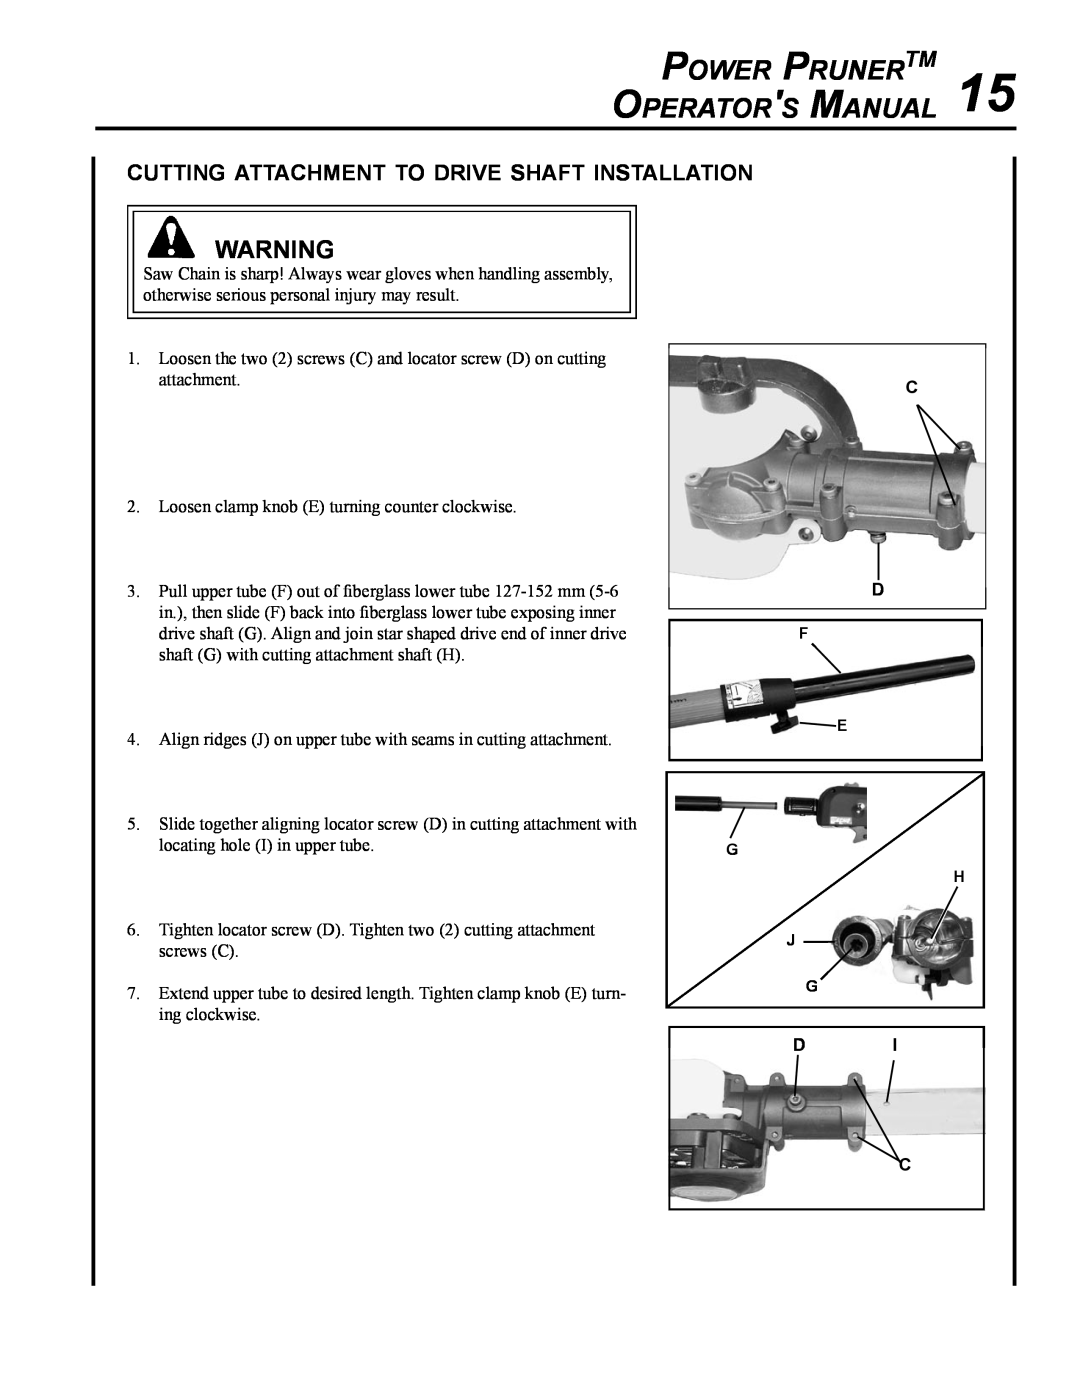 Echo PPT-265H manual cutting attachment to drive shaft installation, Power PrunerTM Operators Manual 